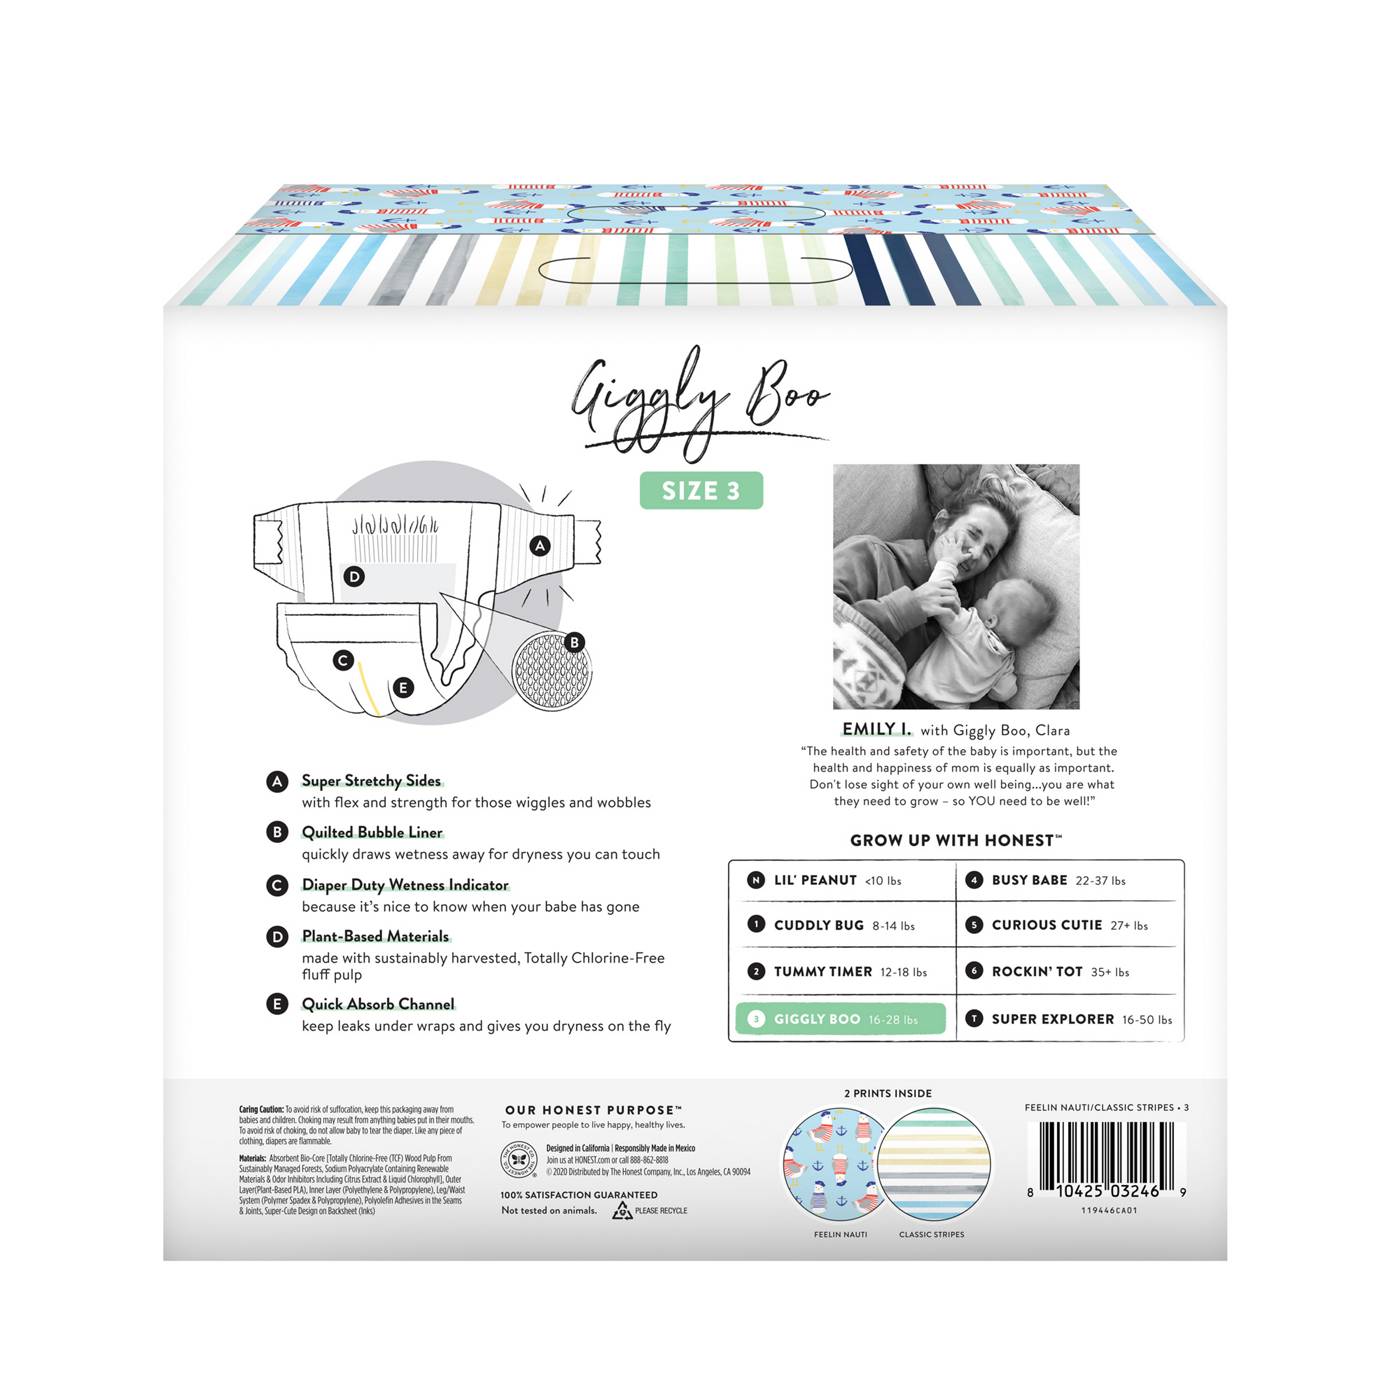 The Honest Company Clean Conscious Diapers Club Box - Size 3, 2 Print Pack; image 9 of 9